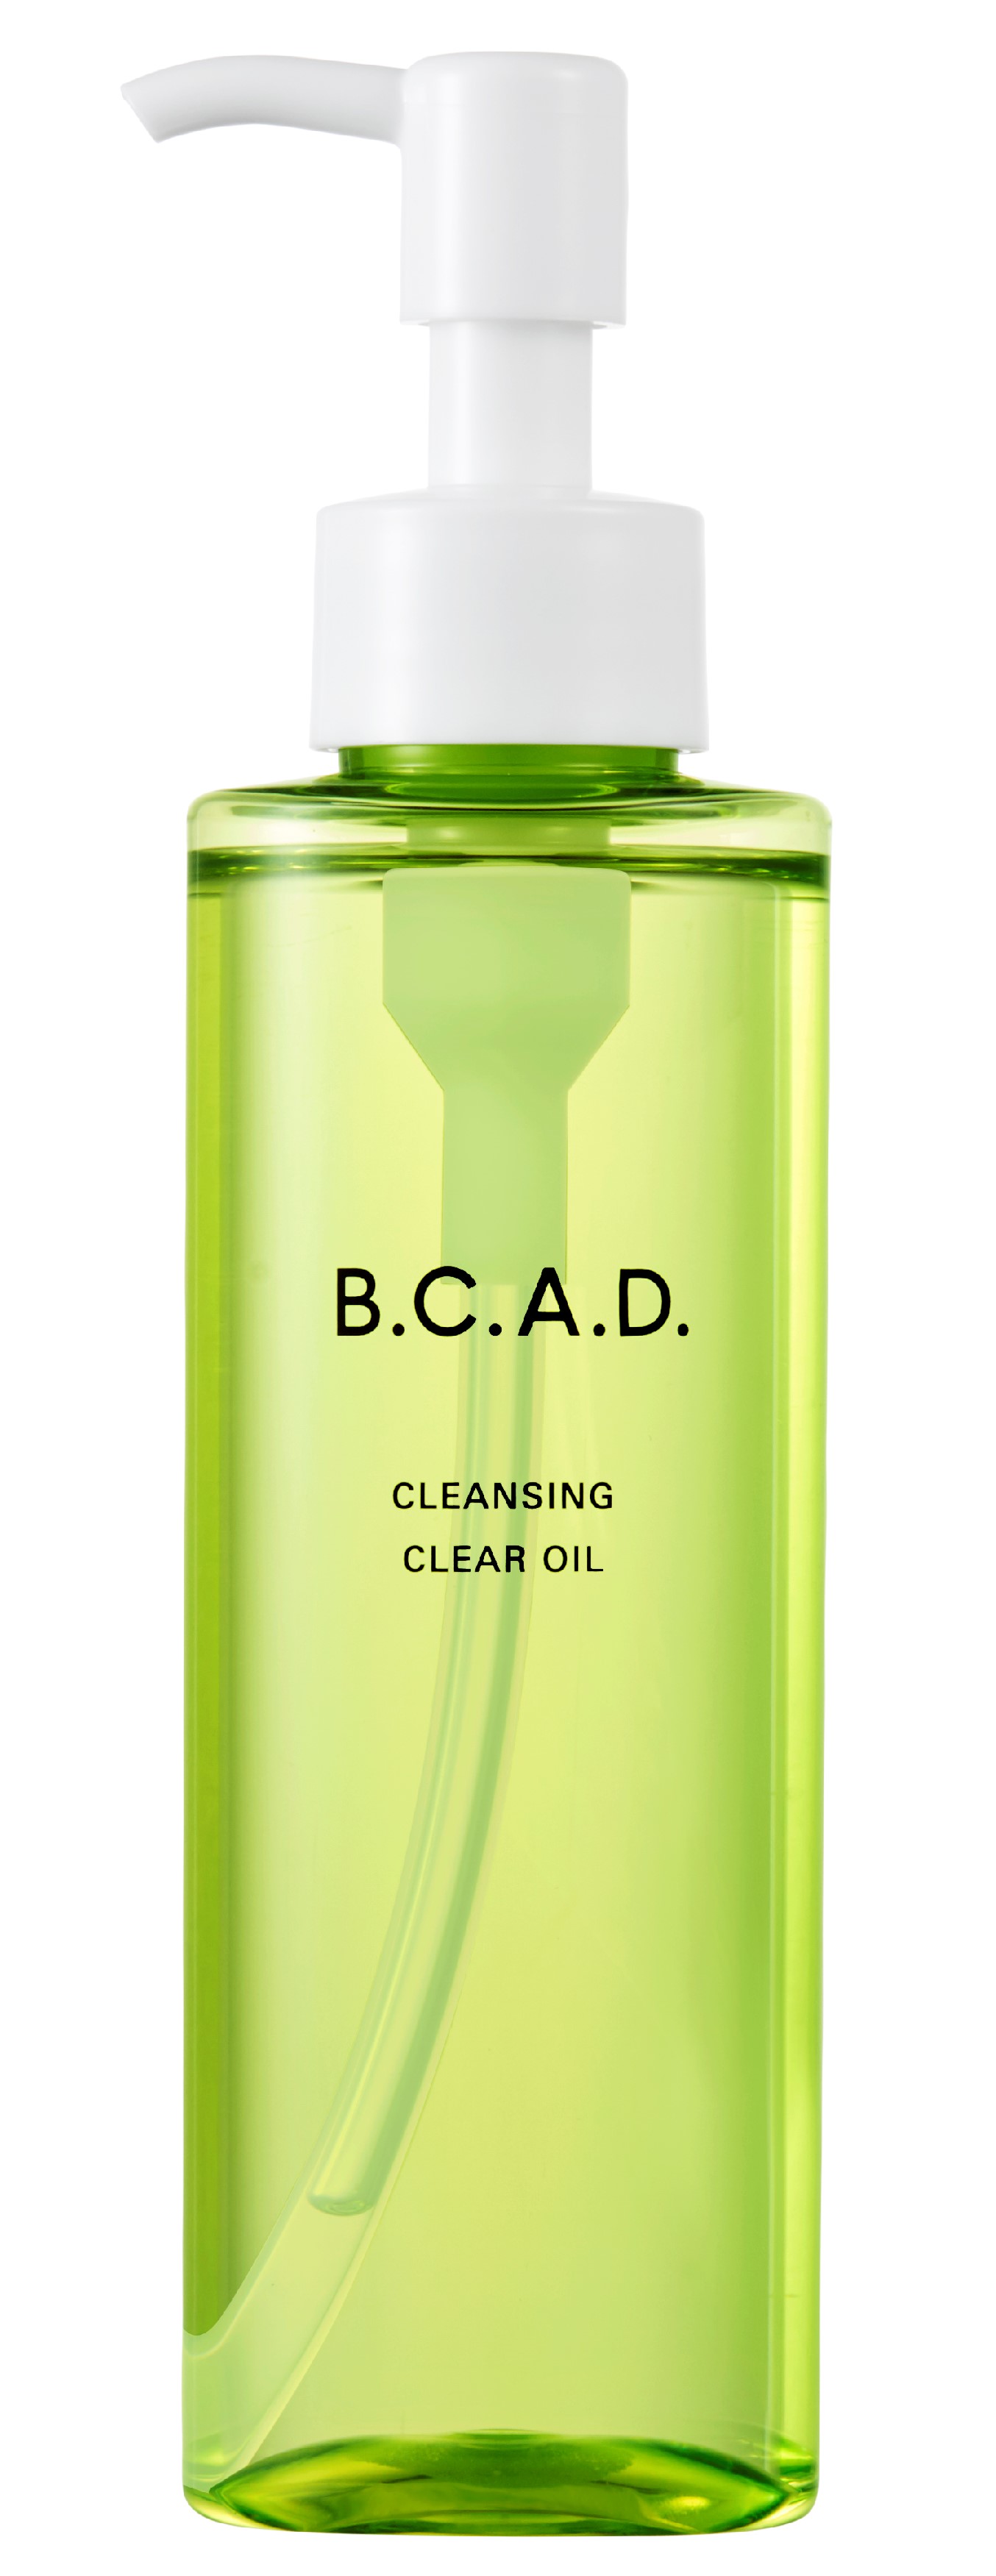 BCAD cleansing